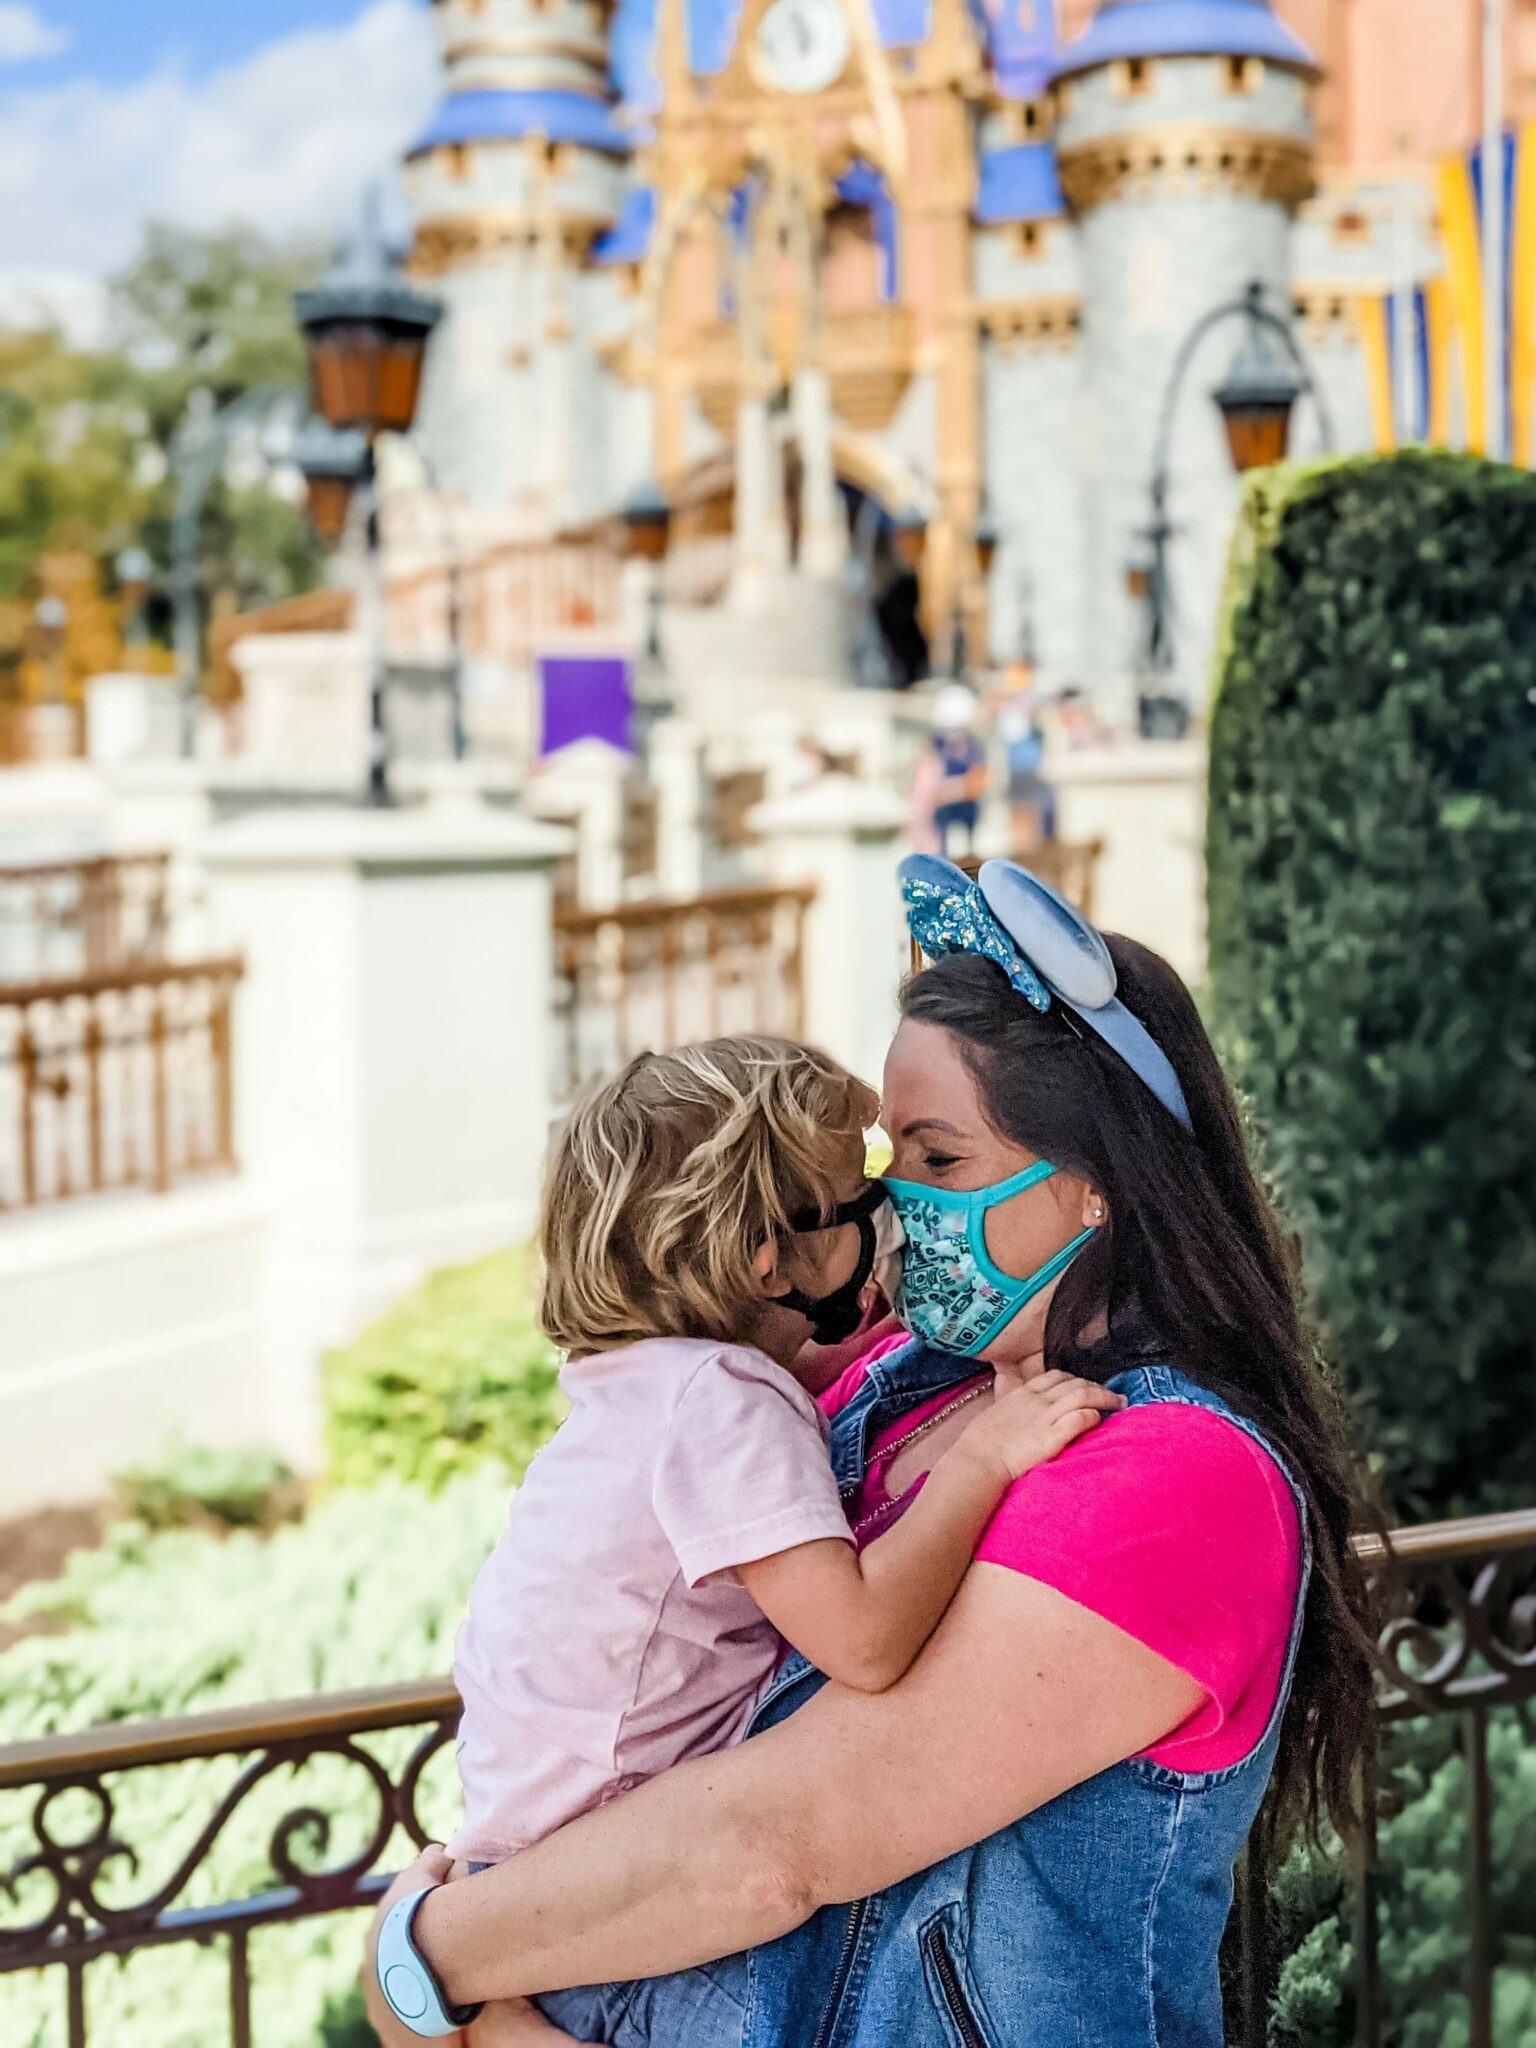 Tips for Taking Great Pictures at Disney World While Wearing a Mask All Things with Purpose Sarah Lemp 12